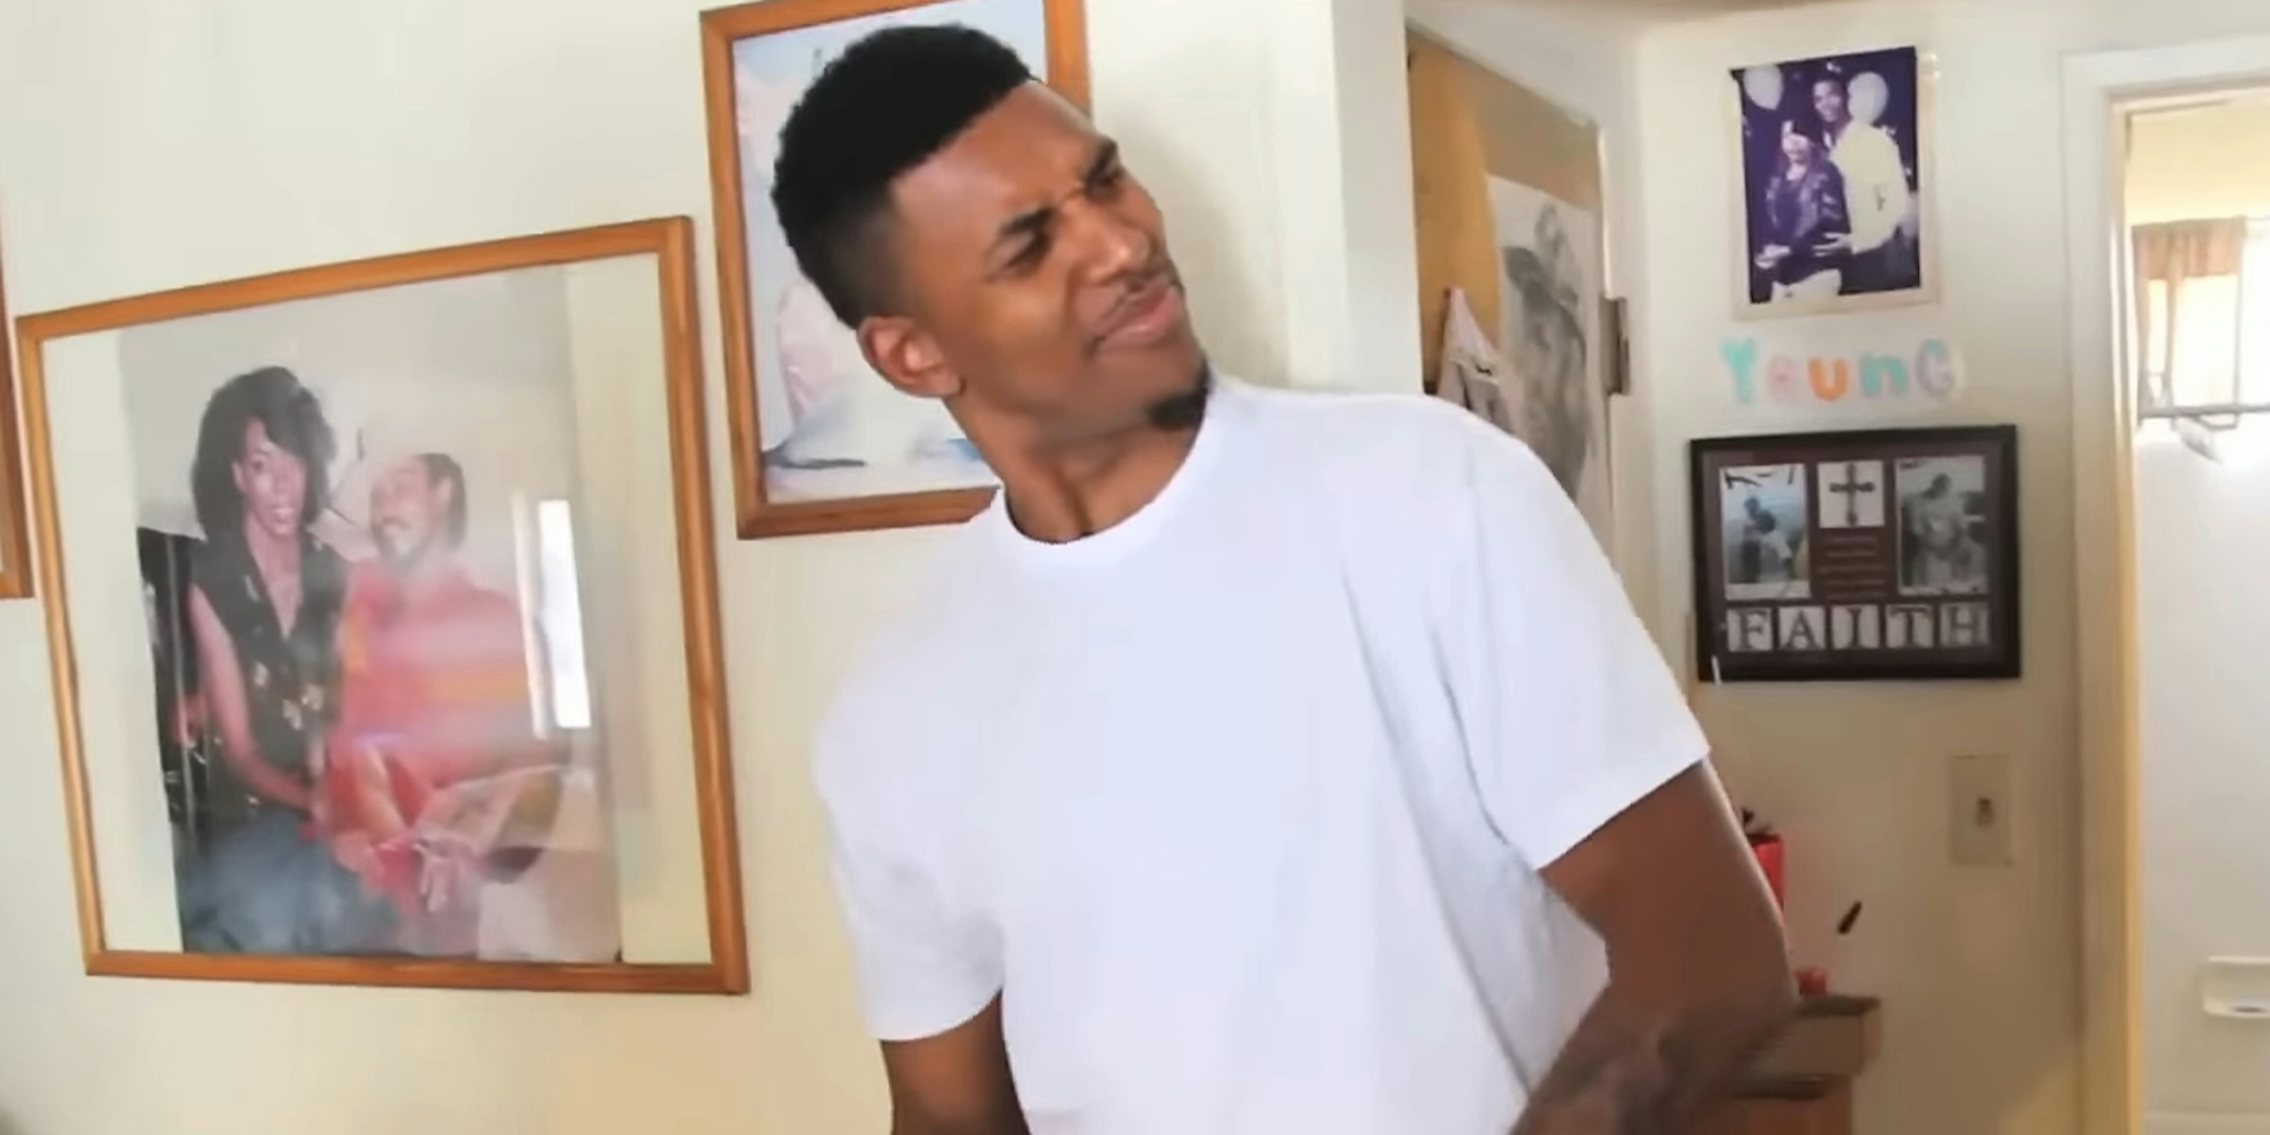 confused meme: The 'Confused' or 'Confused Nick Young' meme